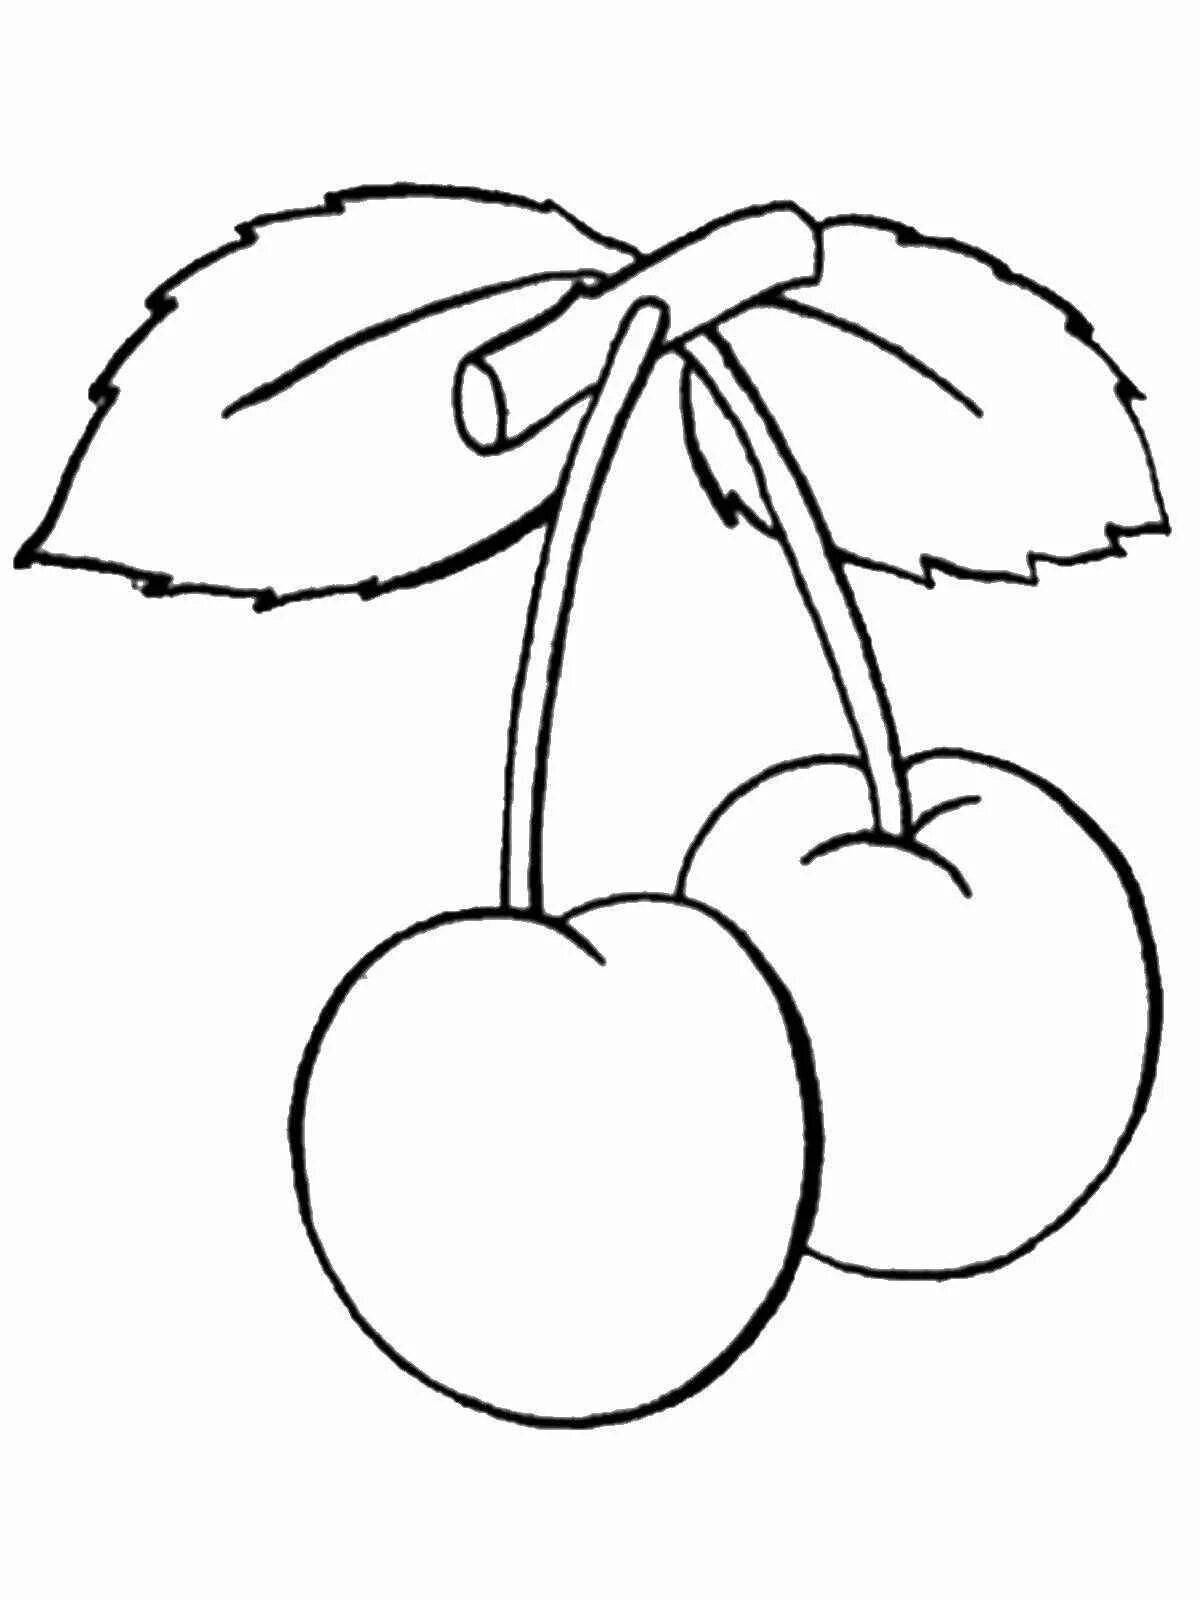 Creative cherry coloring book for kids